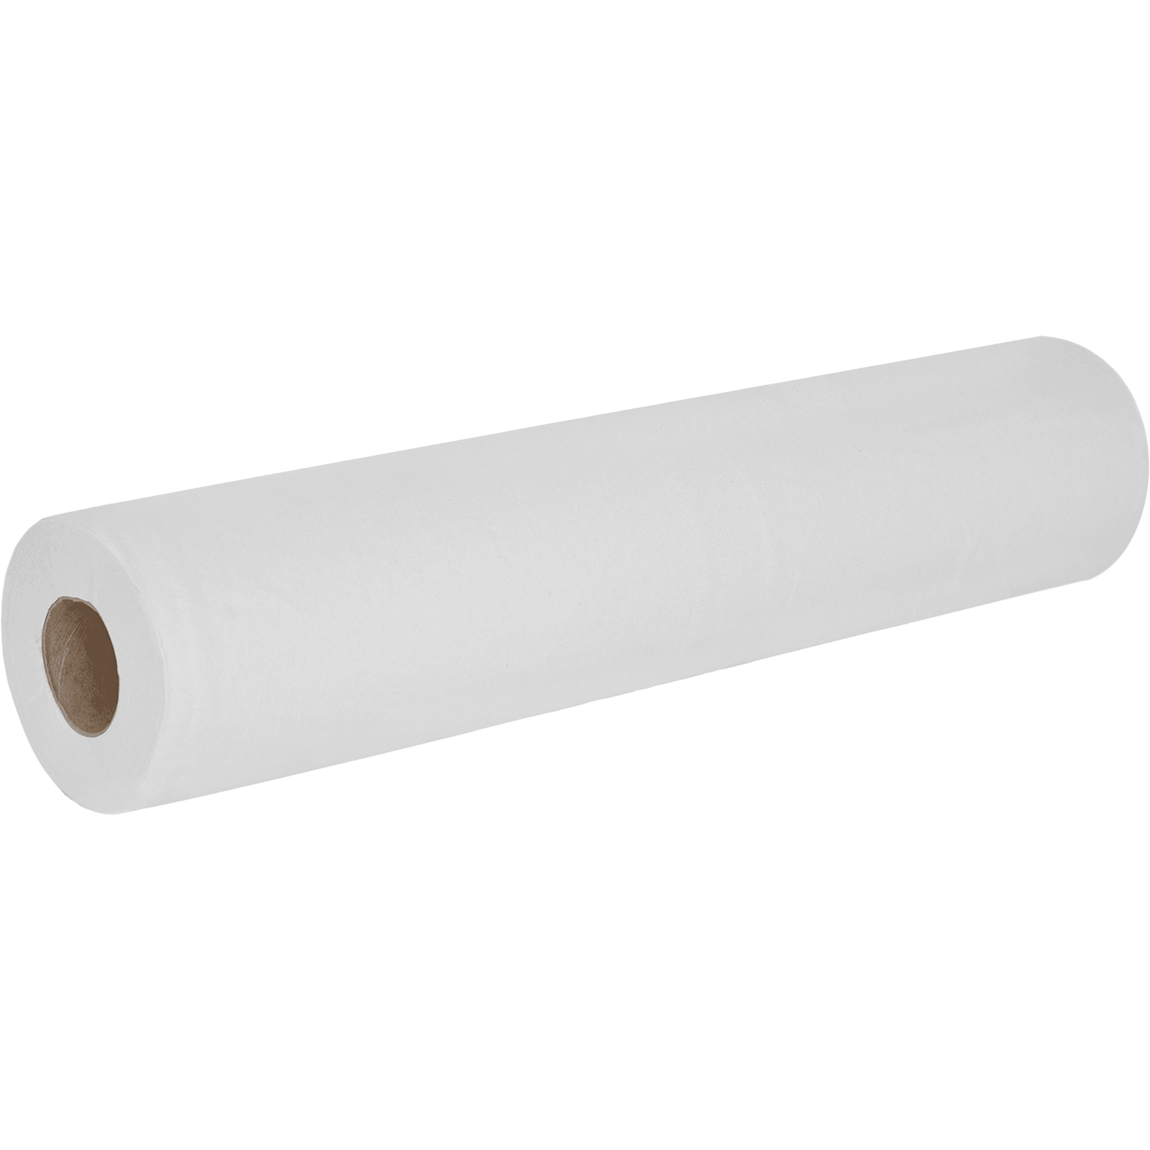 Essentials White Couch Roll 20" - 2ply - 40m x 500mm - Case of 12